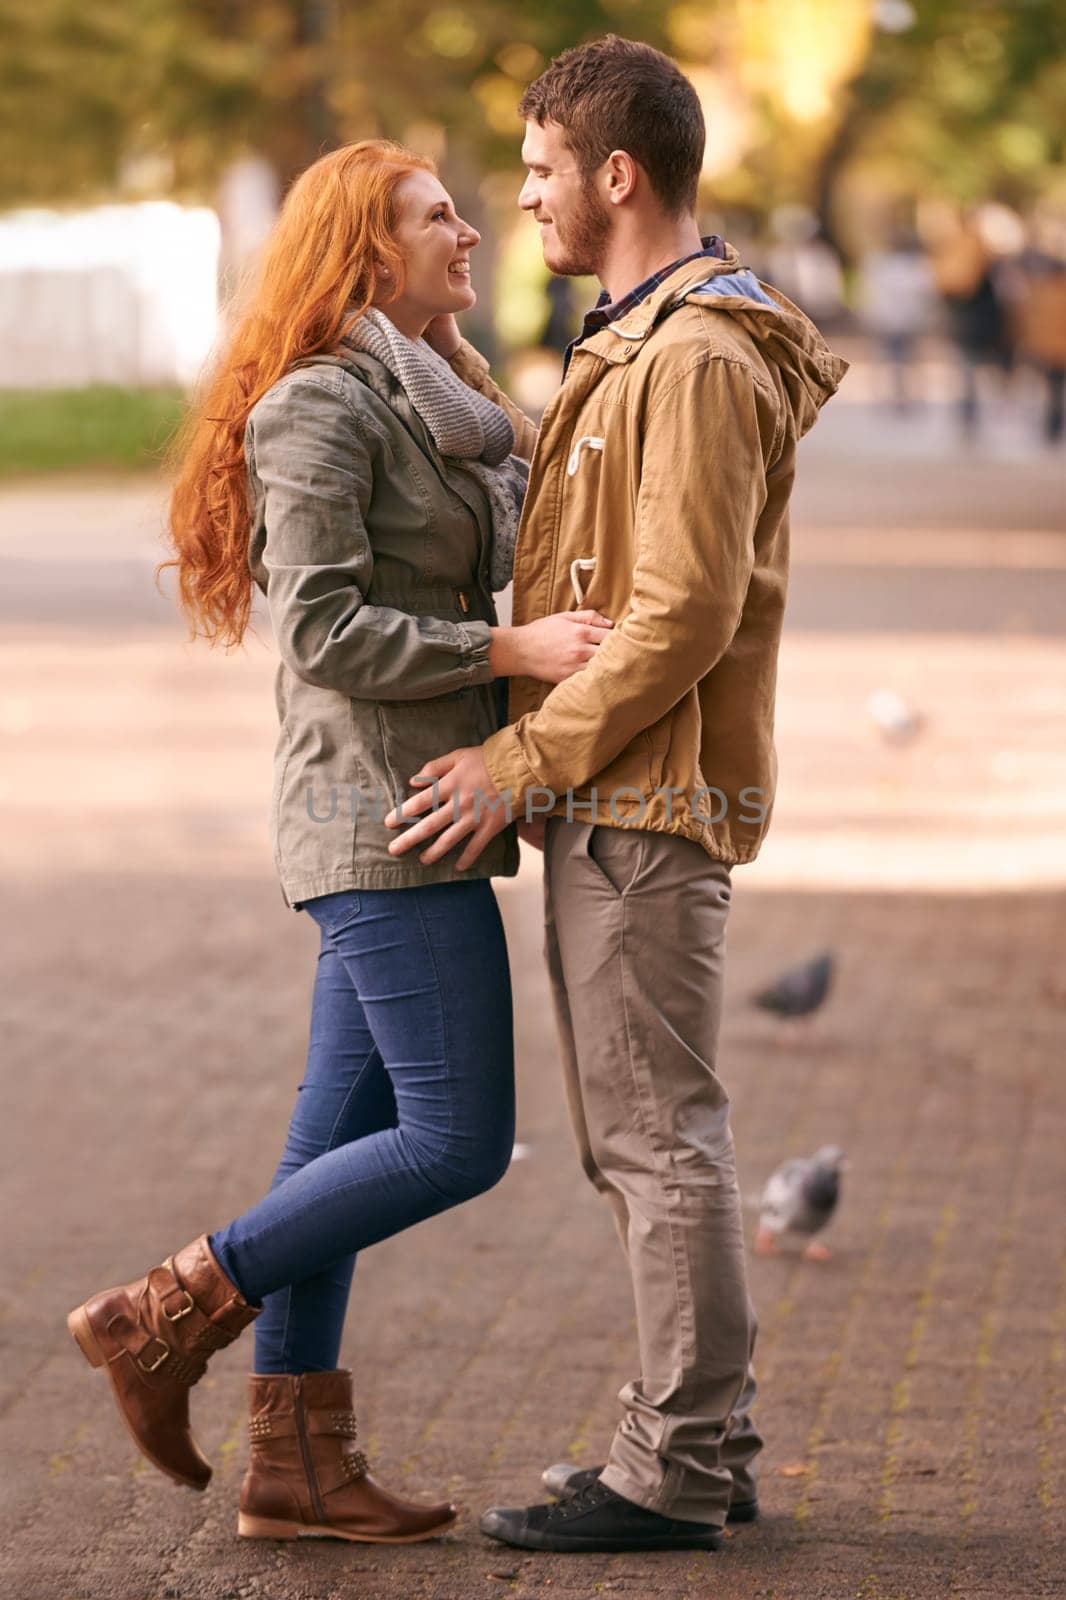 Couple, love and smile with date at park in cold weather or winter, together and support in London. Relationship, commitment and bonding for romance with soulmate, care and happiness for affection.